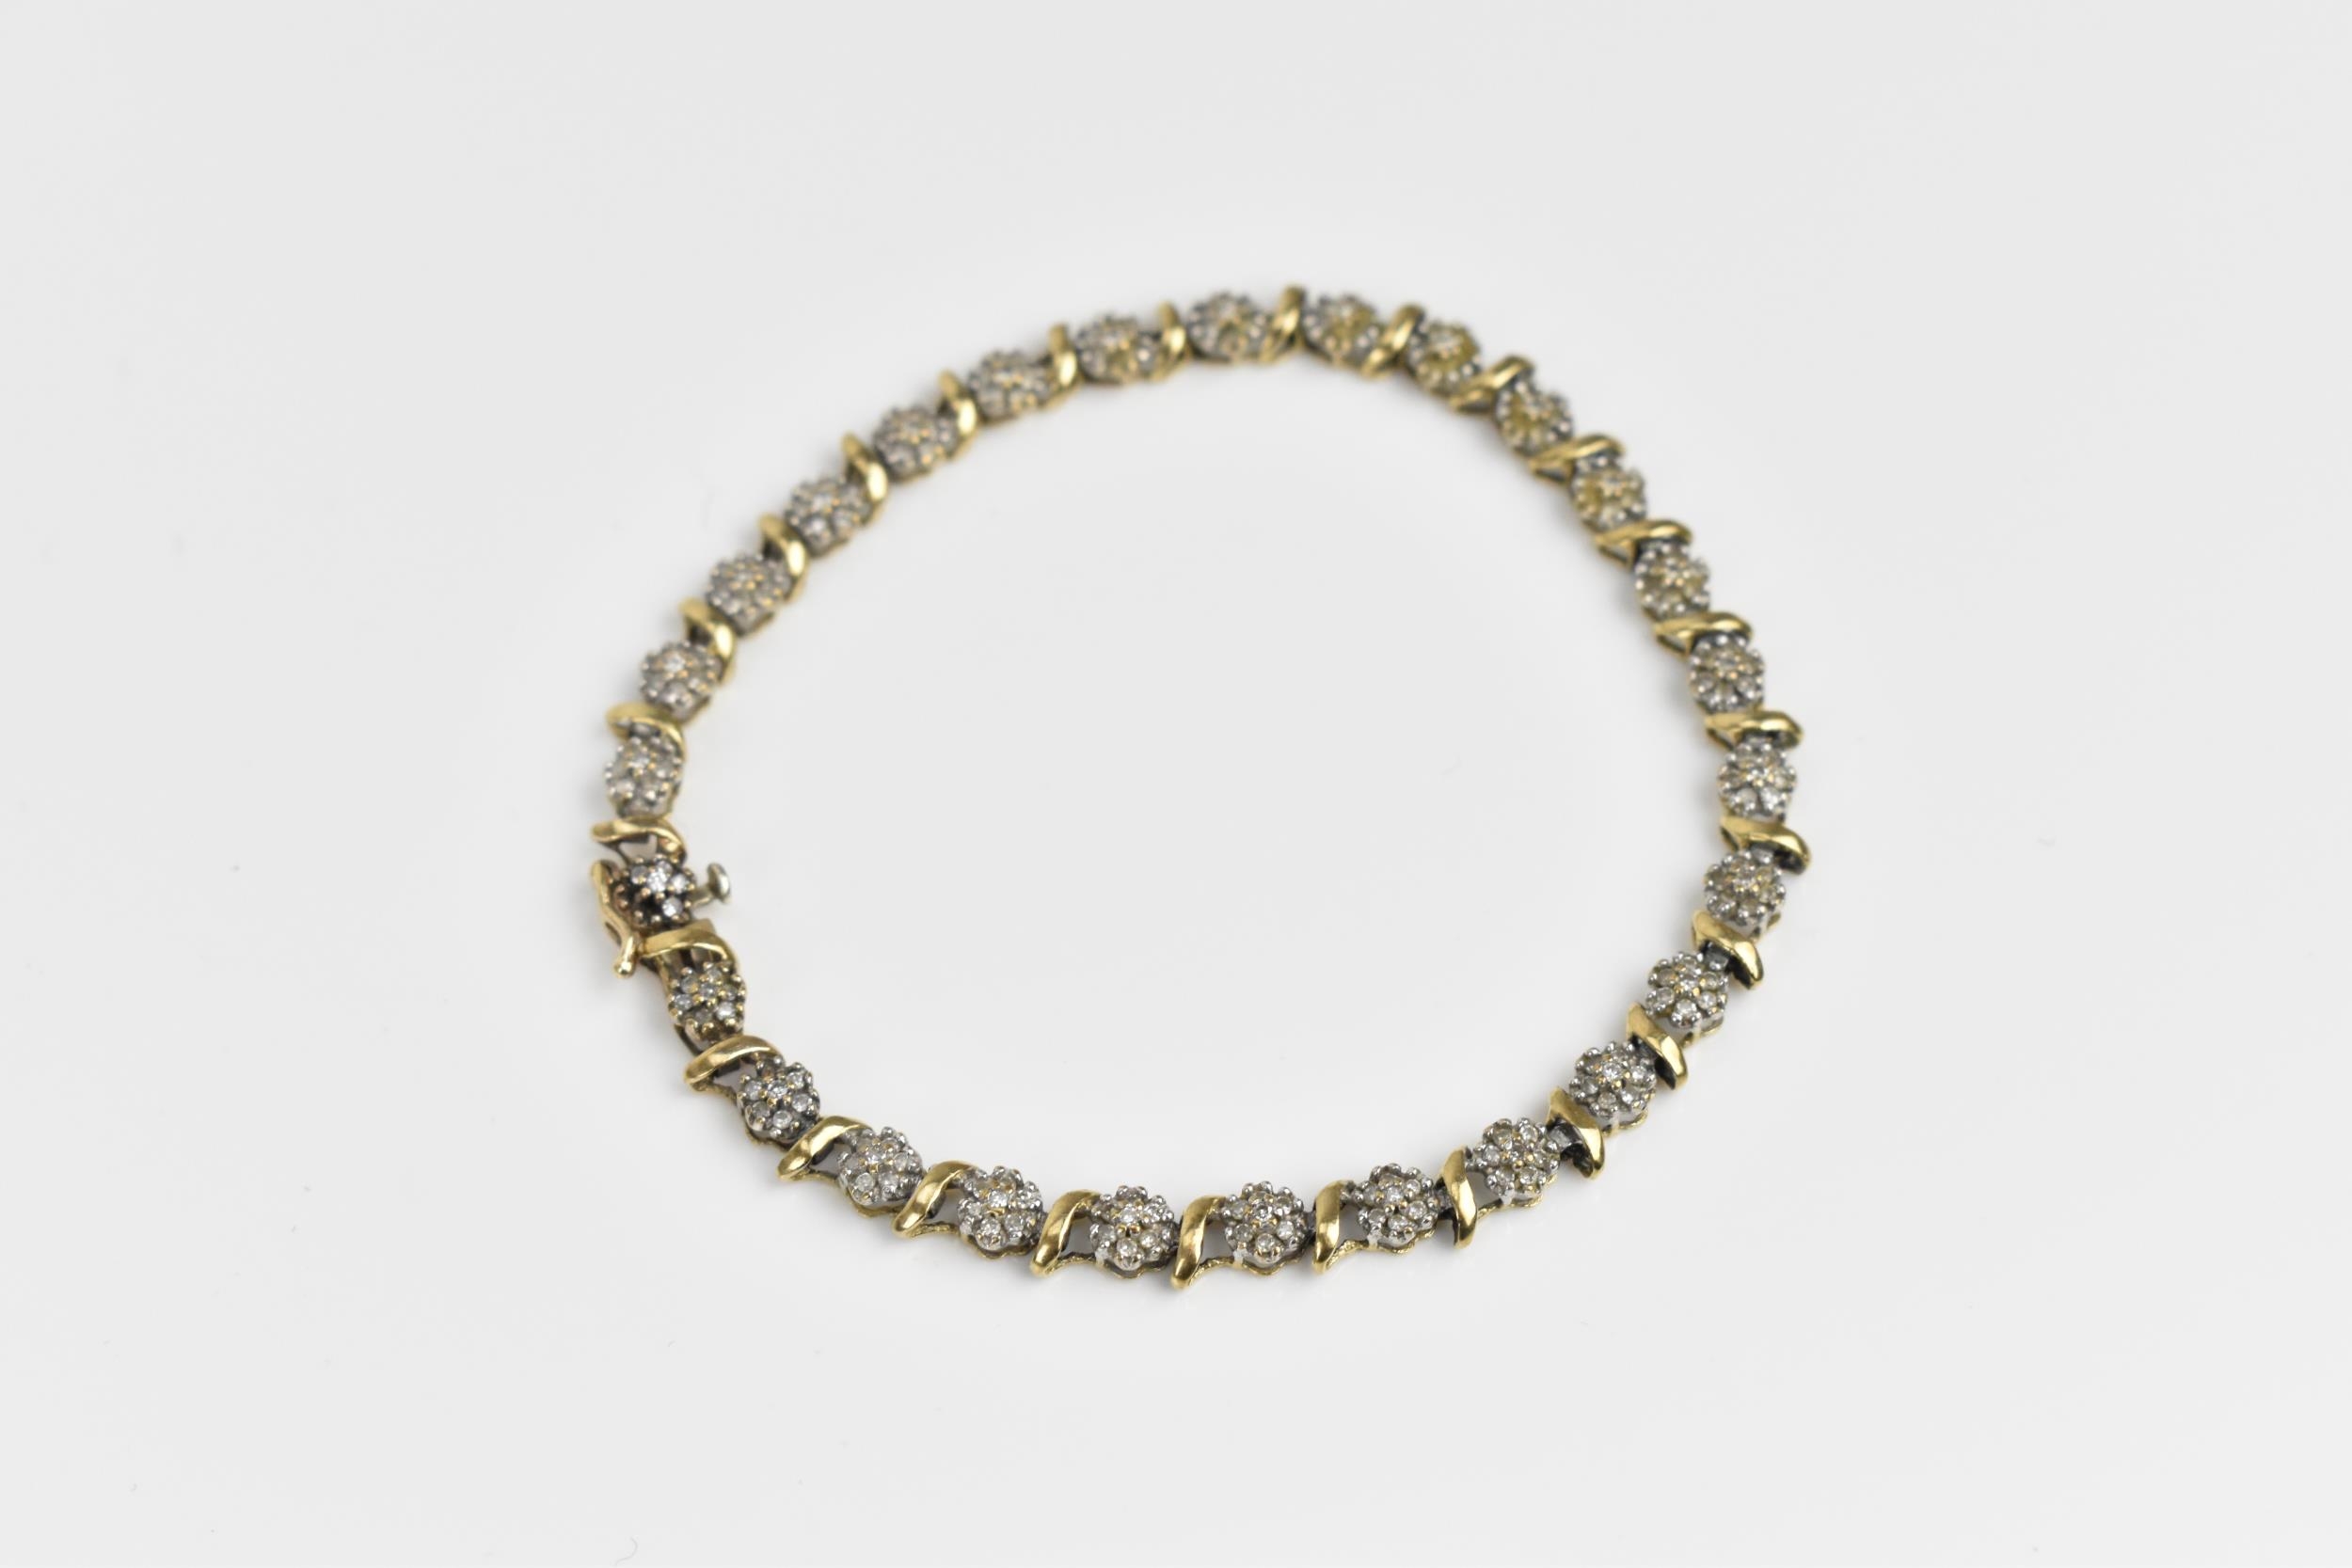 A 9ct yellow gold and diamond bracelet, designed with twenty-seven floral diamond clusters, with - Image 2 of 7